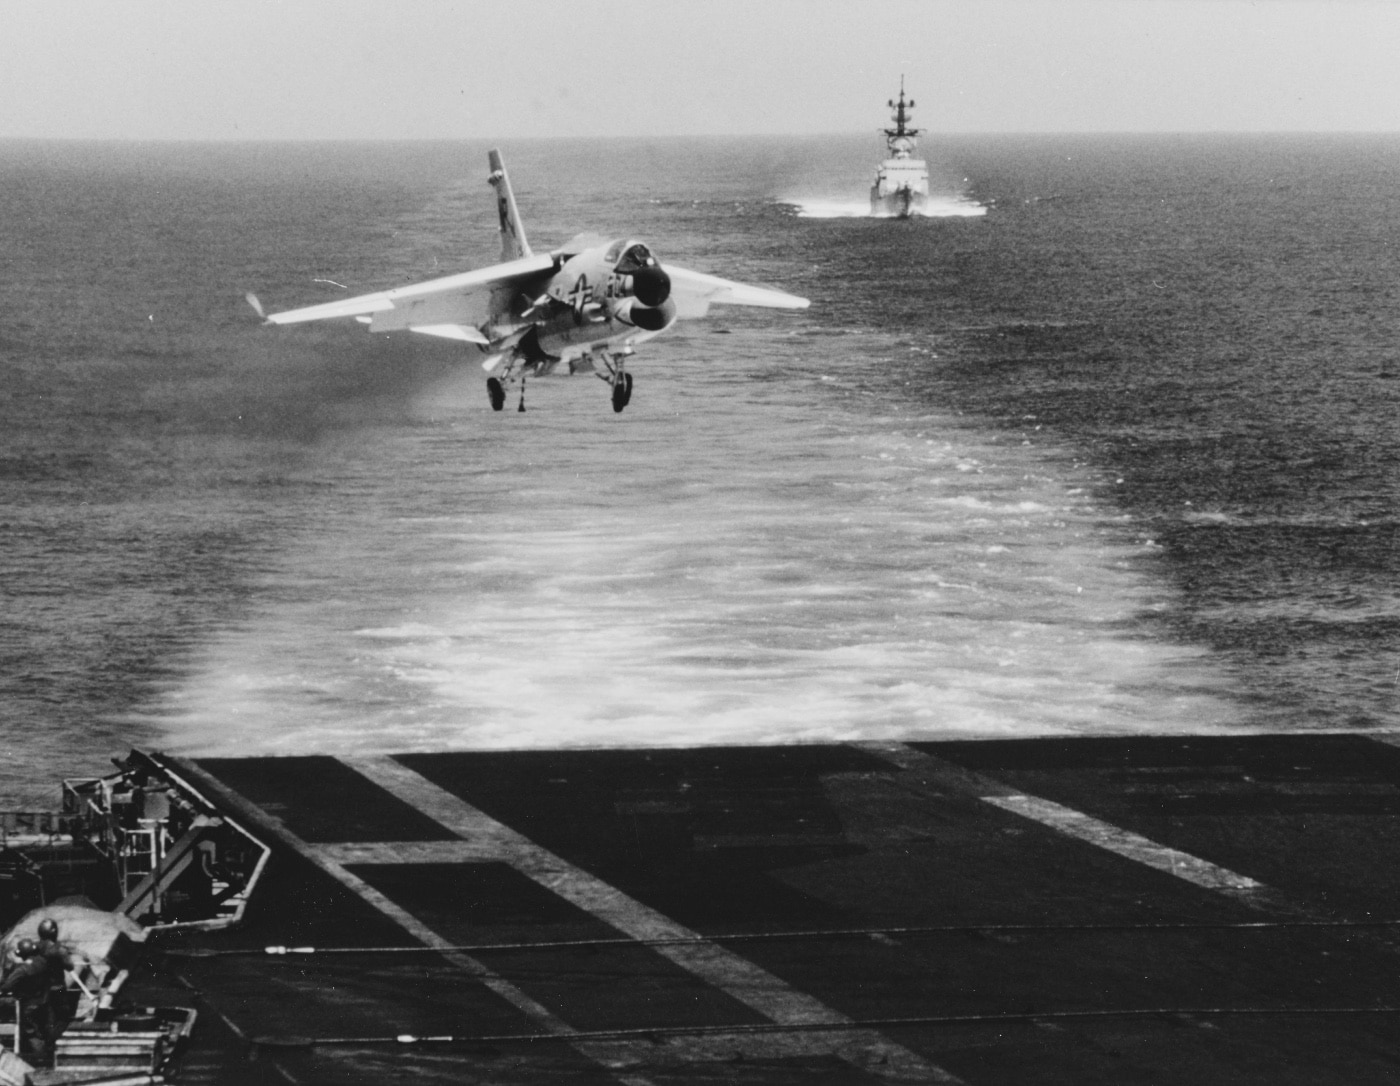 In this image, the carrier-based air superiority F-8 comes in for a landing on the USS Hancock. The fighter was able to exceed the speed of sound and could be equipped with Sidewinder missiles. In the pantheon of planes of fame, the Crusader was the fastest plane the Navy had until the Douglas F-4 Phantom II. The F-8 became the first jet to set a national speed record as an aircraft to fly from the east to west coast in slightly more than three hours.